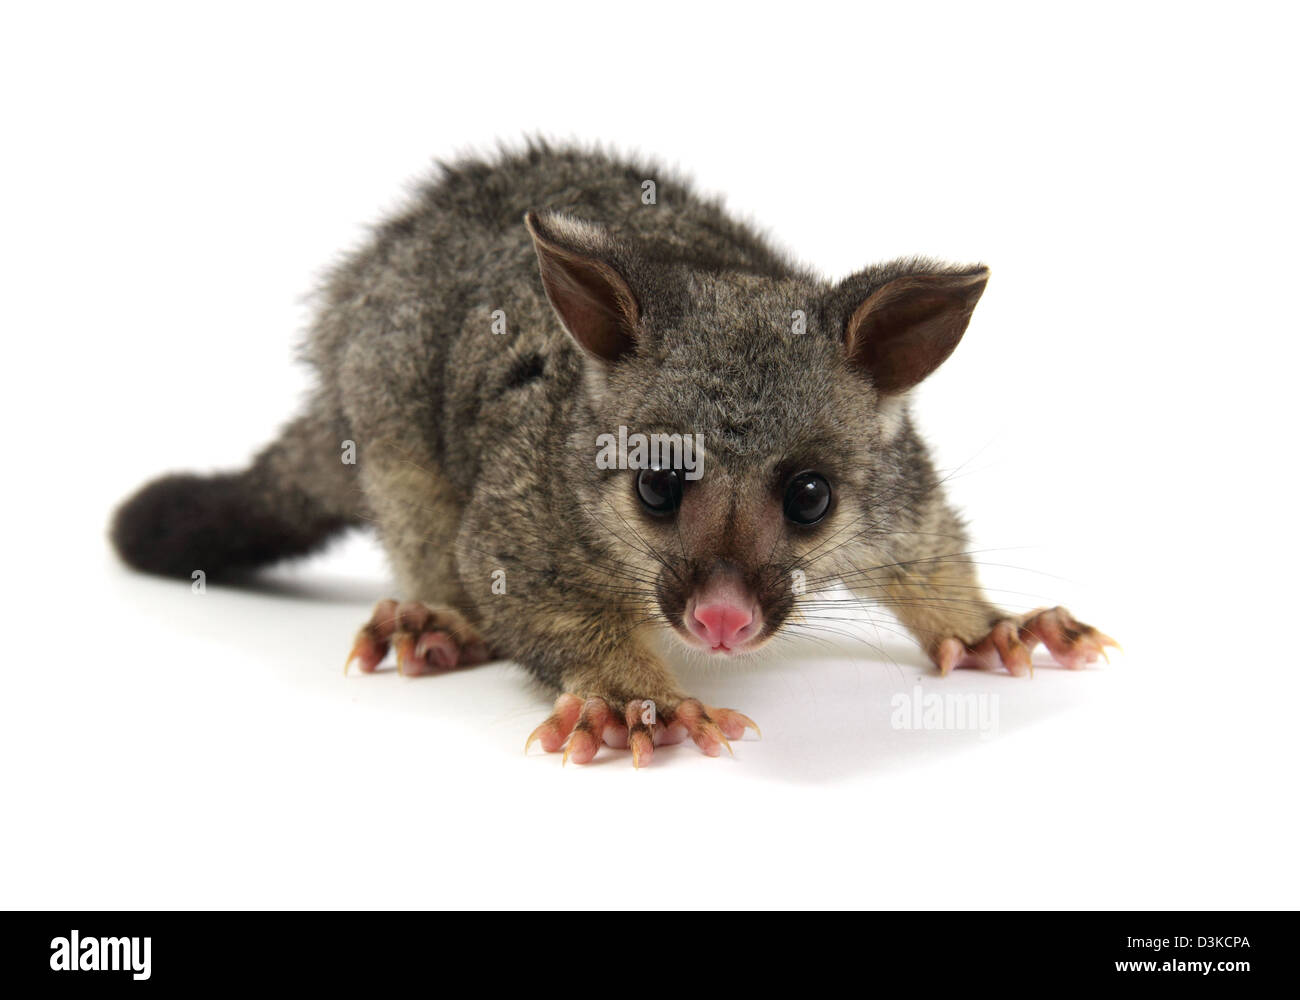 Brushtail possum photographed in a studio Stock Photo